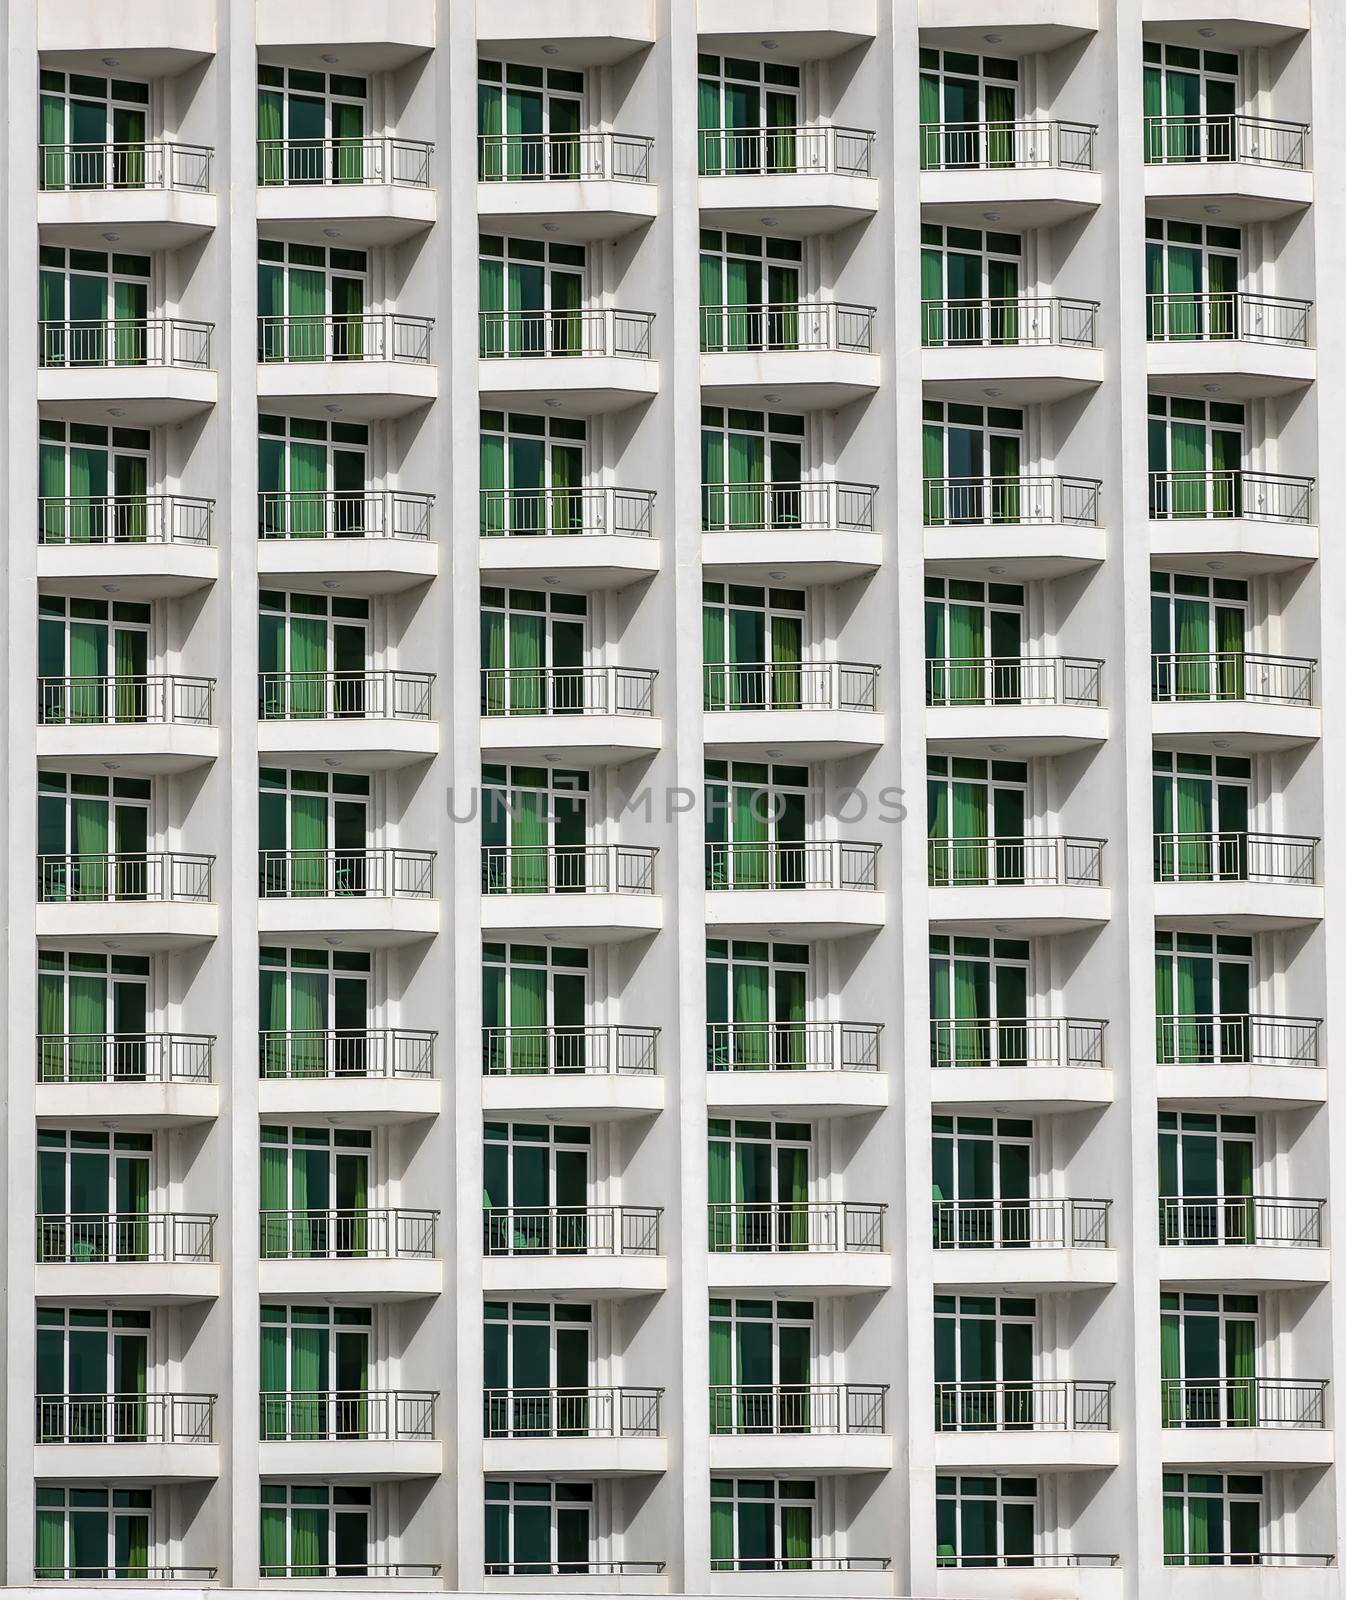 a repeating pattern of windows and a balcony. Windows of a hotel building.   by EdVal